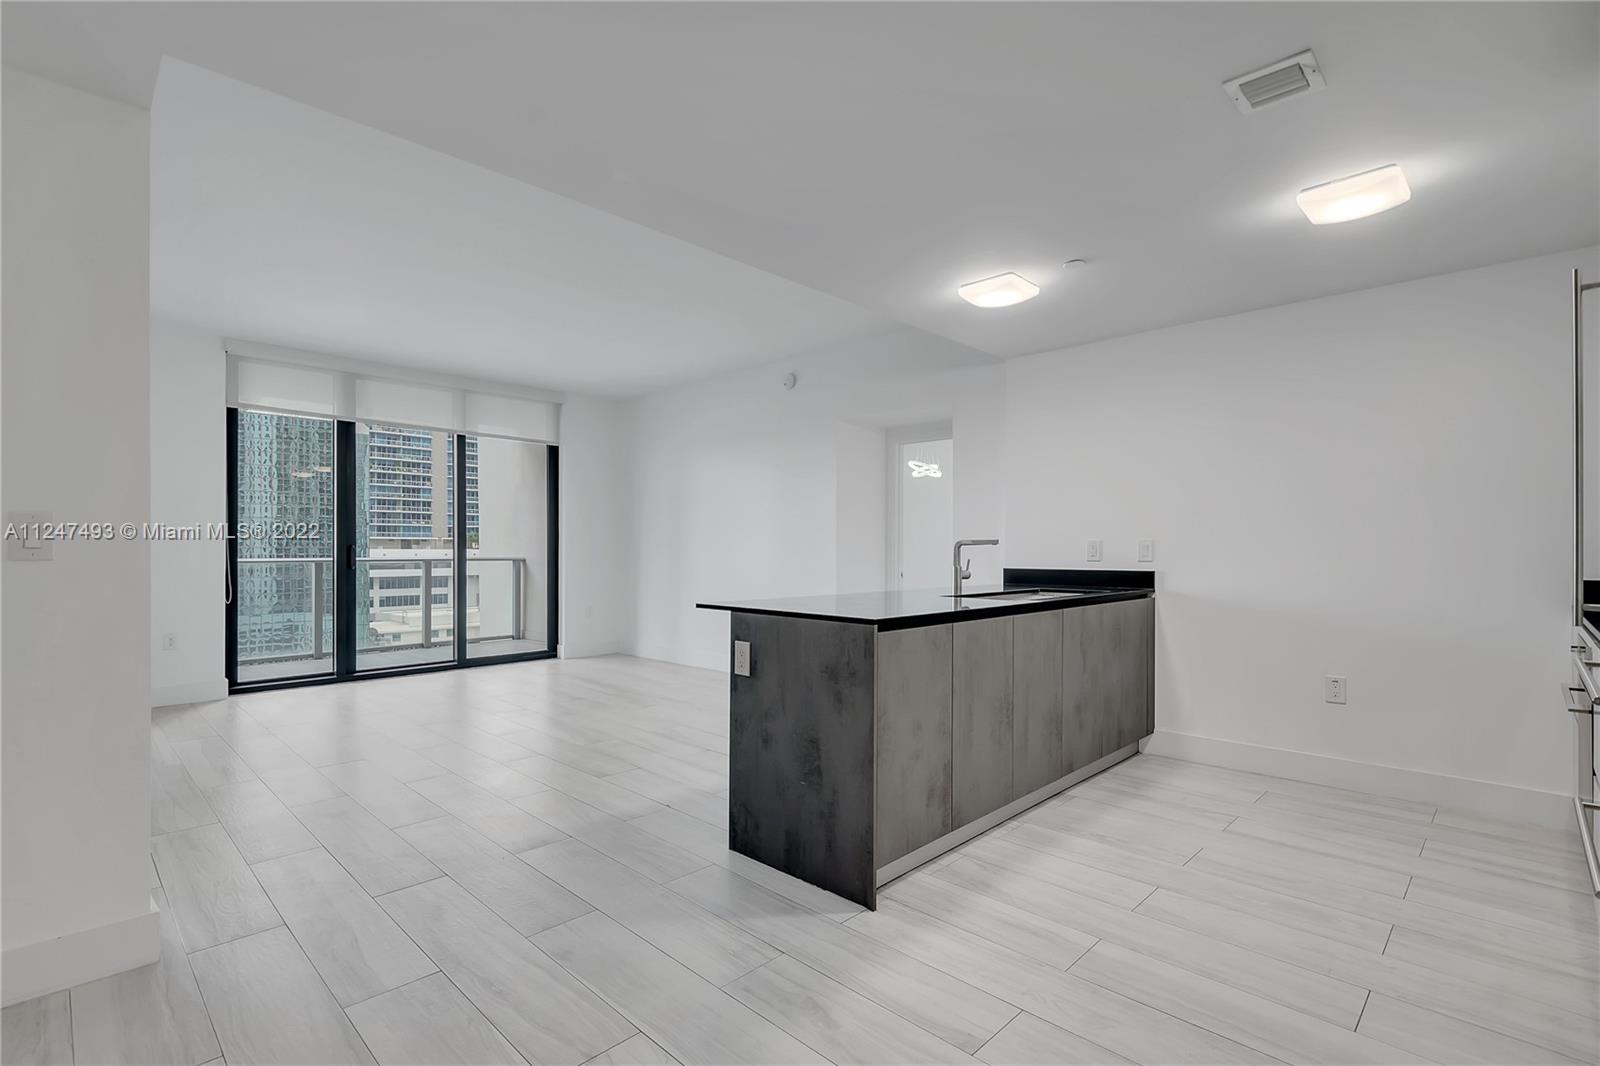 Enjoy the comfort of living in this spacious 2 BR + 3 BA + DEN that features an in-unit private elevator, 9-ft high ceilings, & floor-to-ceiling windows. 2 showers + 1 bathtub. In-unit W/D. Enjoy the skyline & partial bay views from the two in-unit balconies. 1010 BRICKELL is among the most amenitized buildings in Miami: rooftop pool & lounge, indoor poor, outdoor running/walking track, fitness center, indoor basketball/racquetball courts, kids playroom, gameroom, virtual golf, BBQ area, & spa. Located in the heart of Brickell within walking distance to the Metromover (public transportation), restaurant & shops, Brickell City Centre, & Mary Brickell Village. Short drive to Miami Beach, Key Biscayne, Coconut Grove, Downtown Miami, Wynwood/Midtown, & Design District.